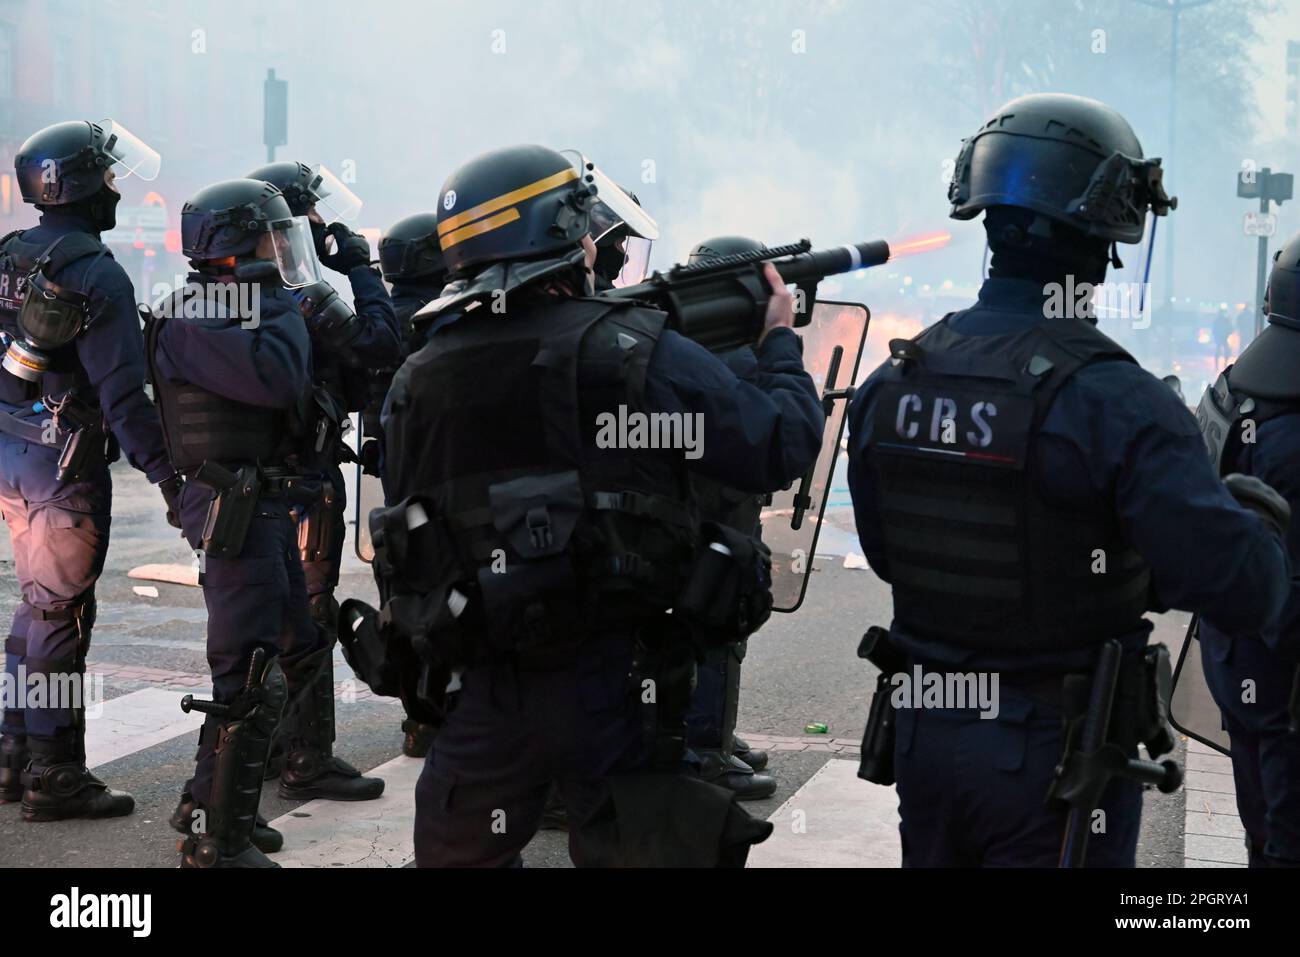 2023 03 23: demonstrations against retirement new law in France by president Macron turned into violent clashes with anti riot police units all over France. Stock Photo